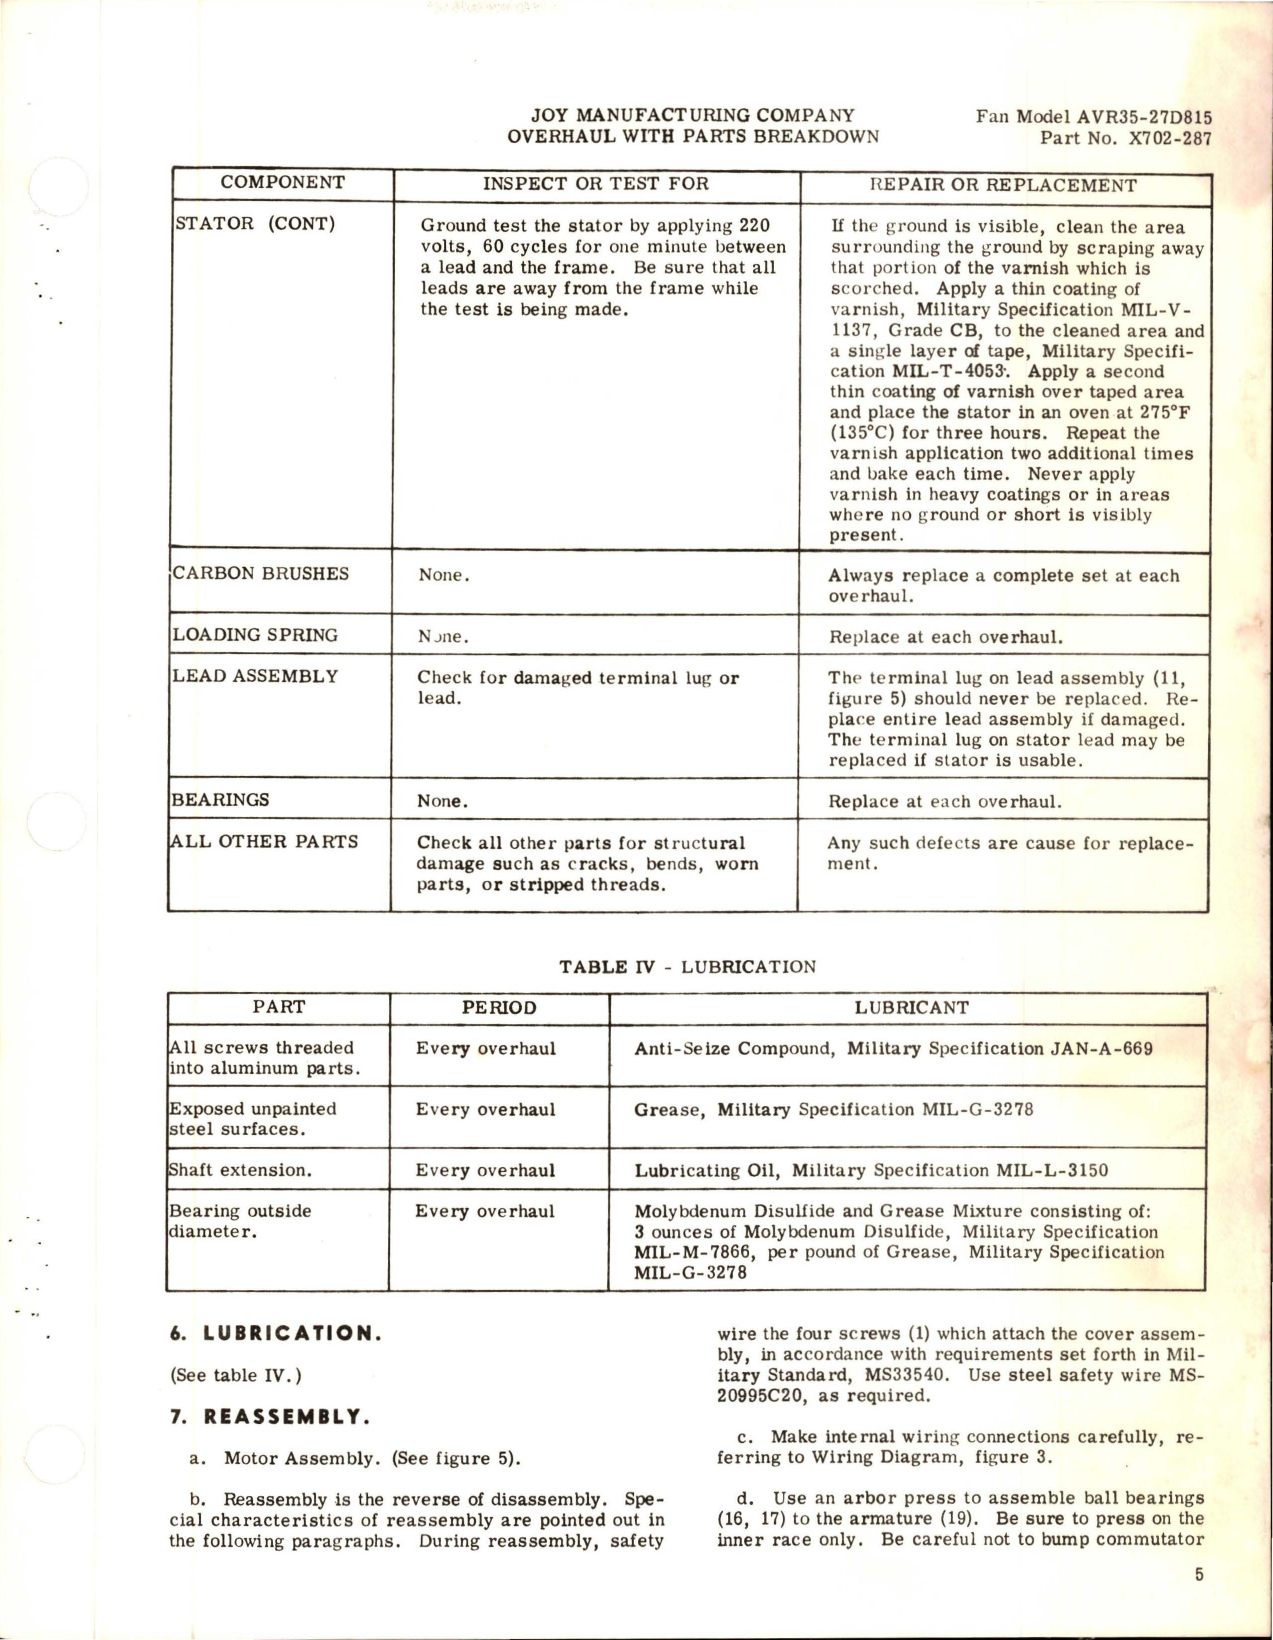 Sample page 5 from AirCorps Library document: Overhaul with Parts Breakdown for Aviation Type Axivane Fan - Part X702-287 